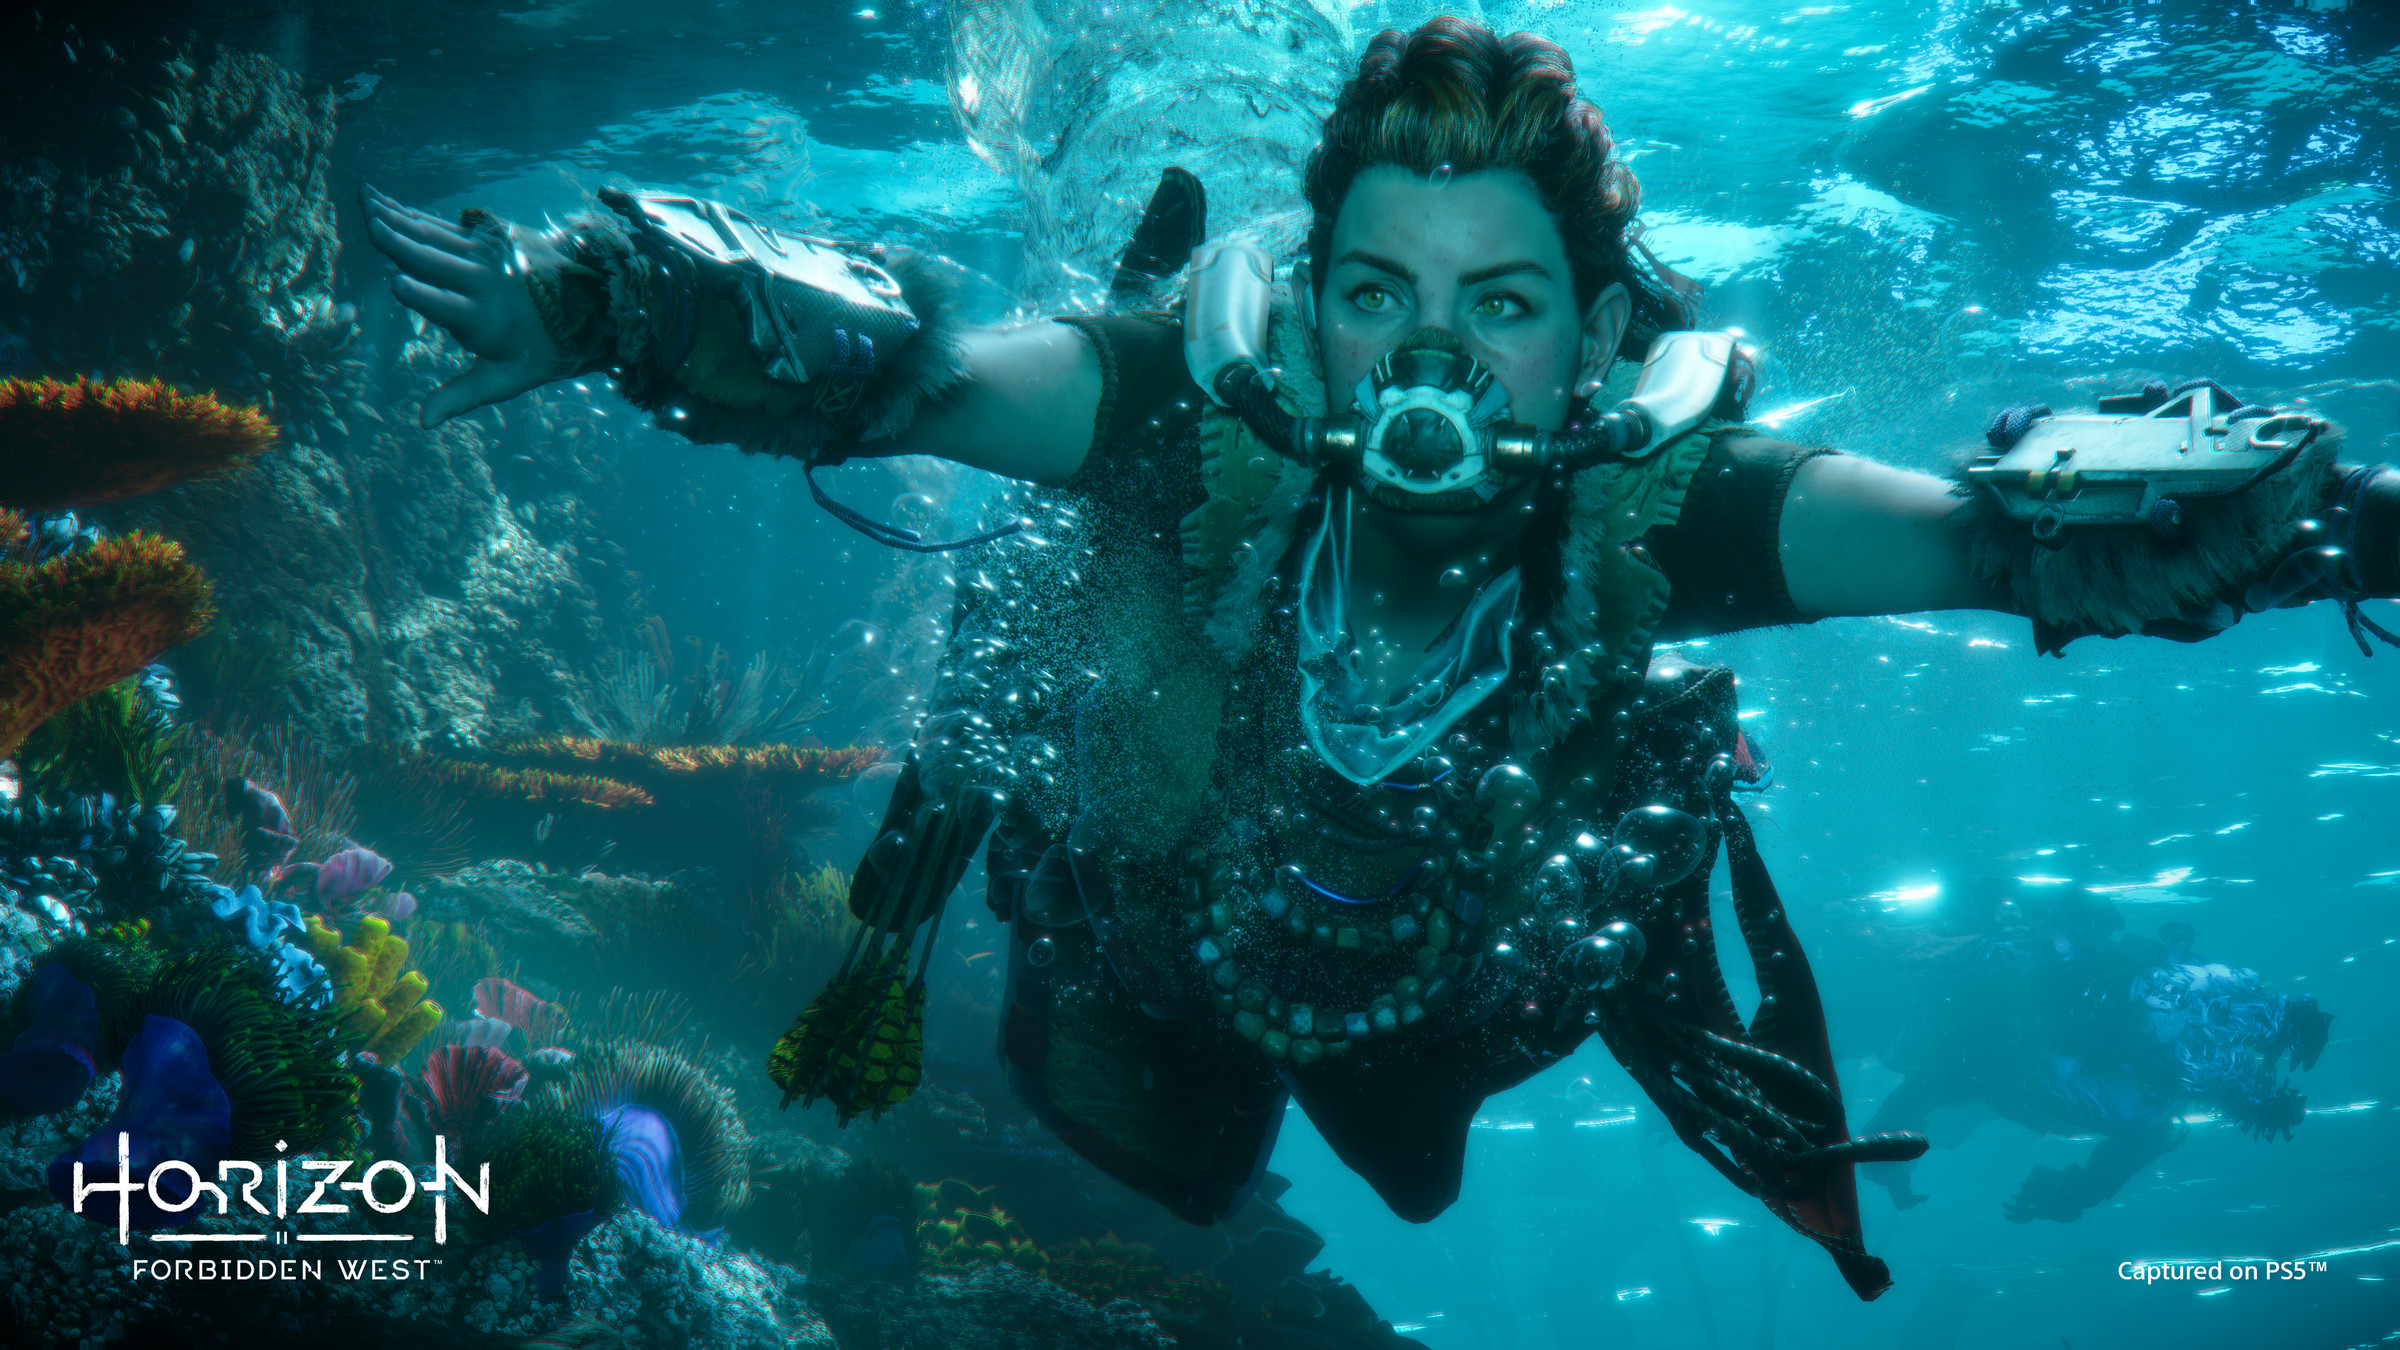 Screenshot from Horizon Forbidden West featuring the main character, Aloy, diving underwater wearing an underwater rebreather